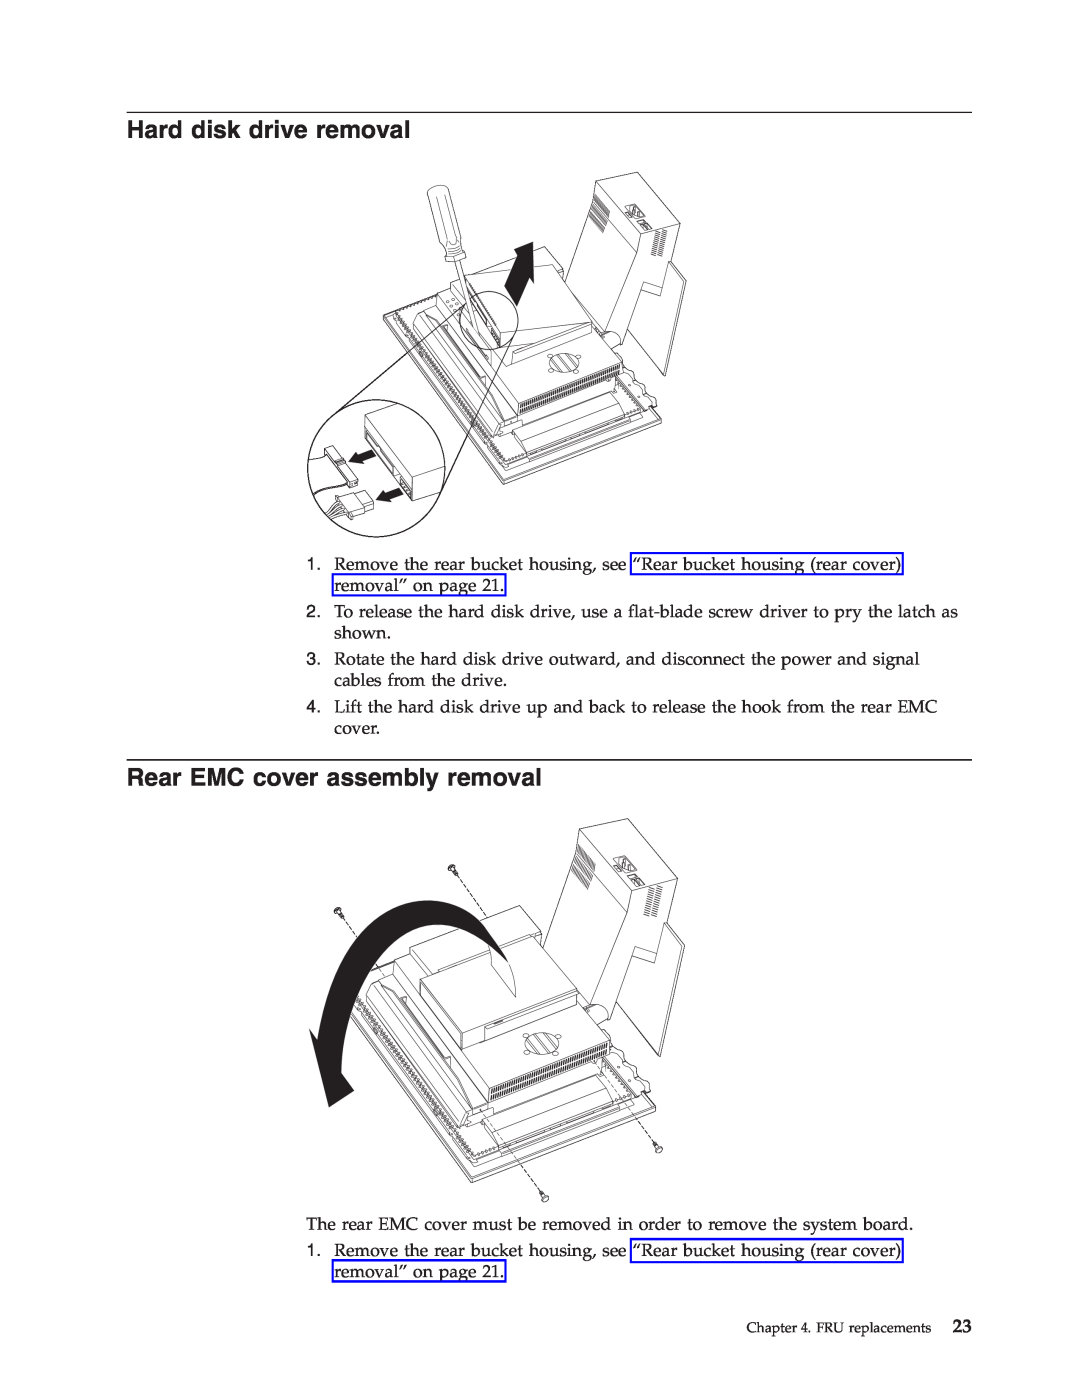 IBM 2179, 6643 manual Hard disk drive removal, Rear EMC cover assembly removal, FRU replacements 